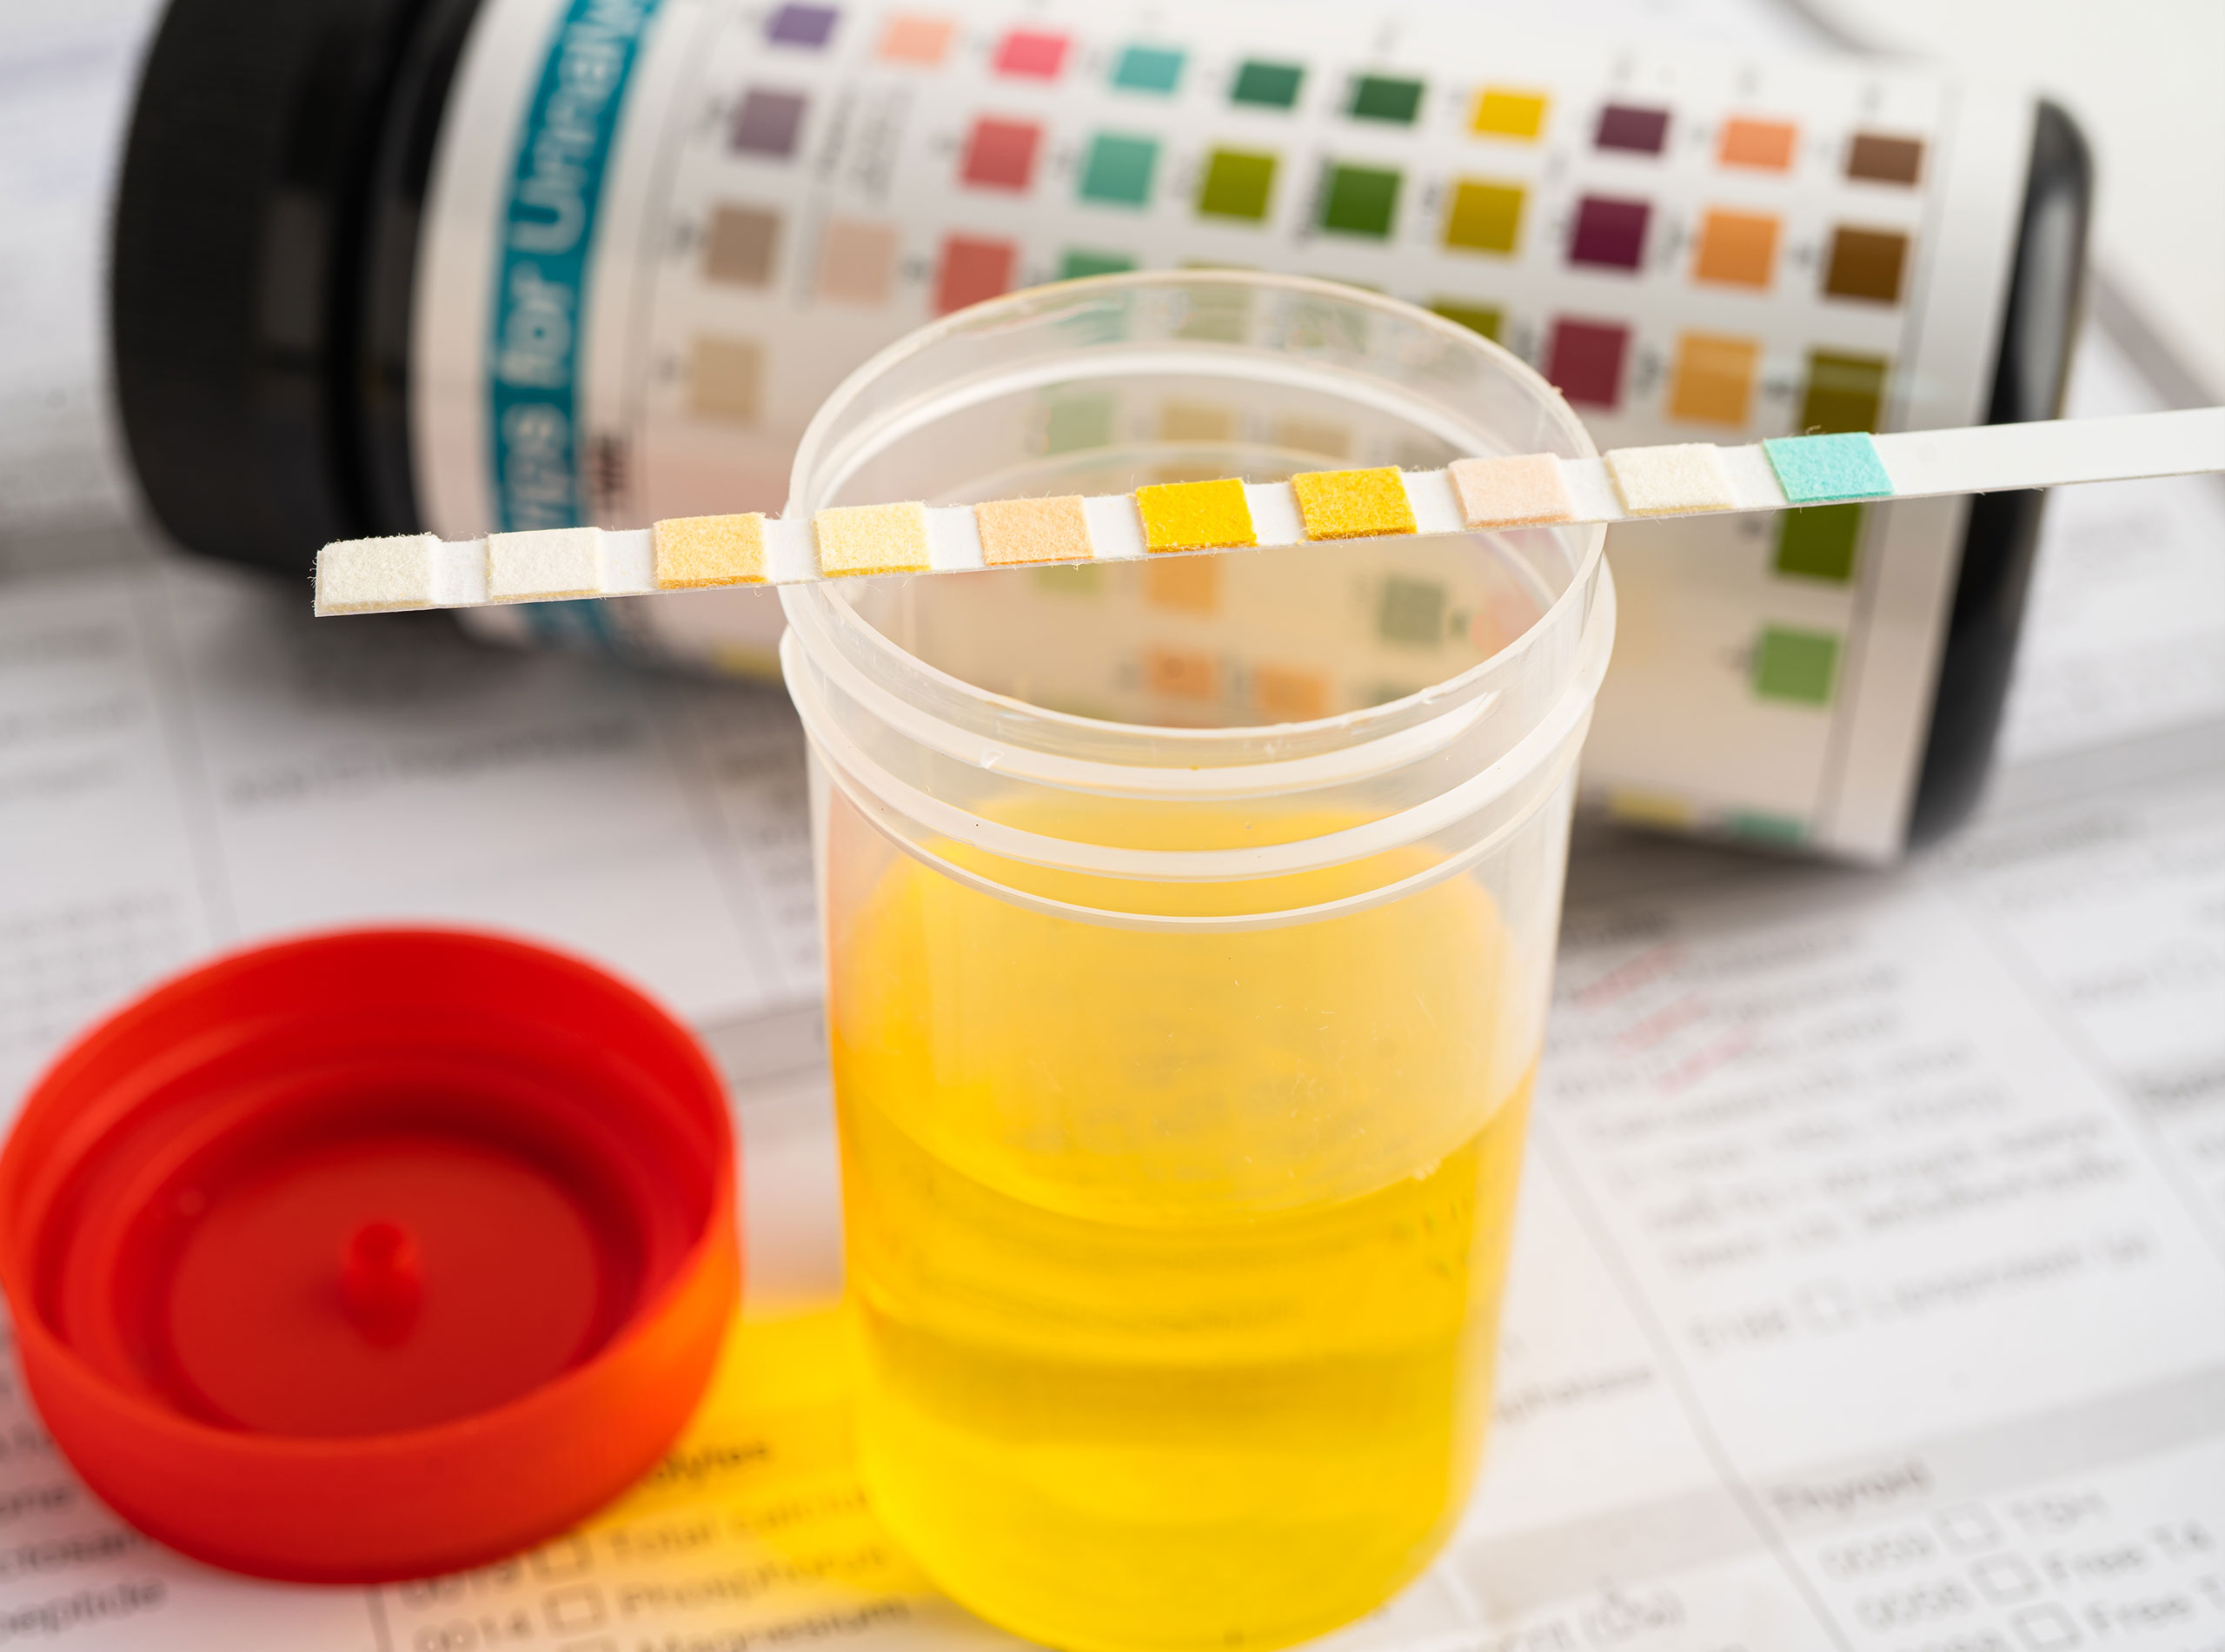 Featured image for “Obtaining a Pet Urine Sample from your Cat or Dog”